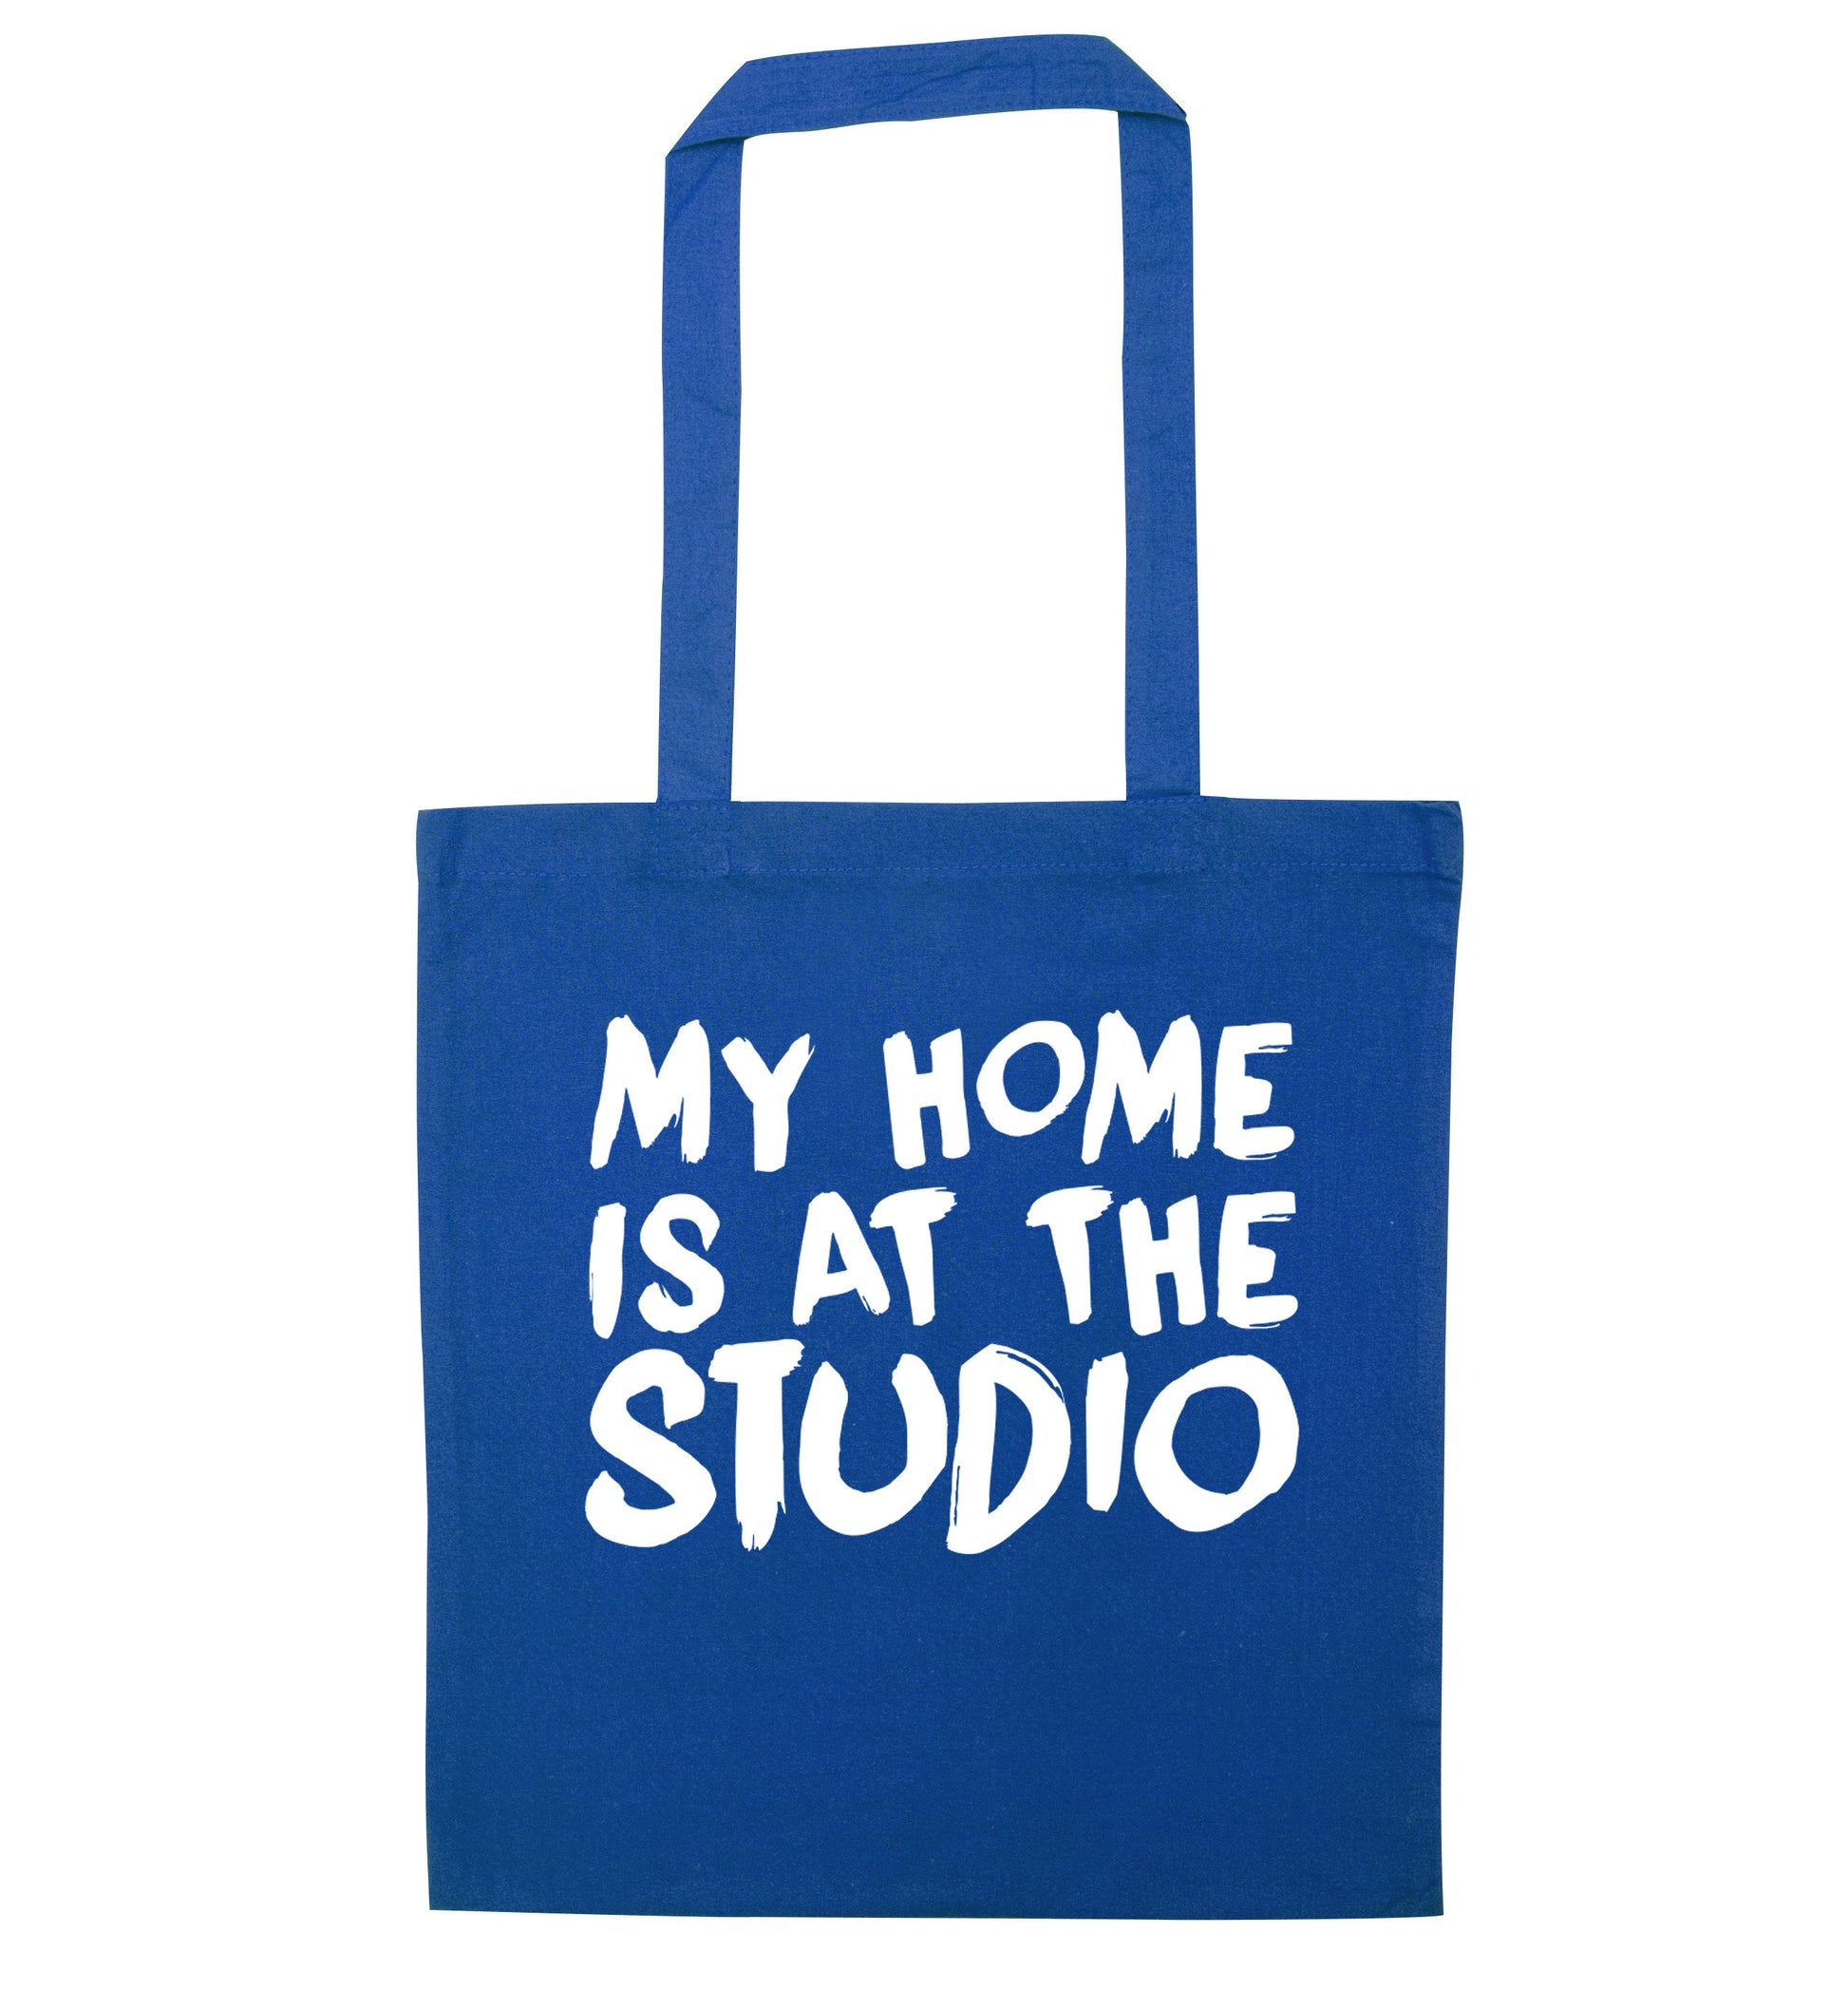 My home is at the studio blue tote bag